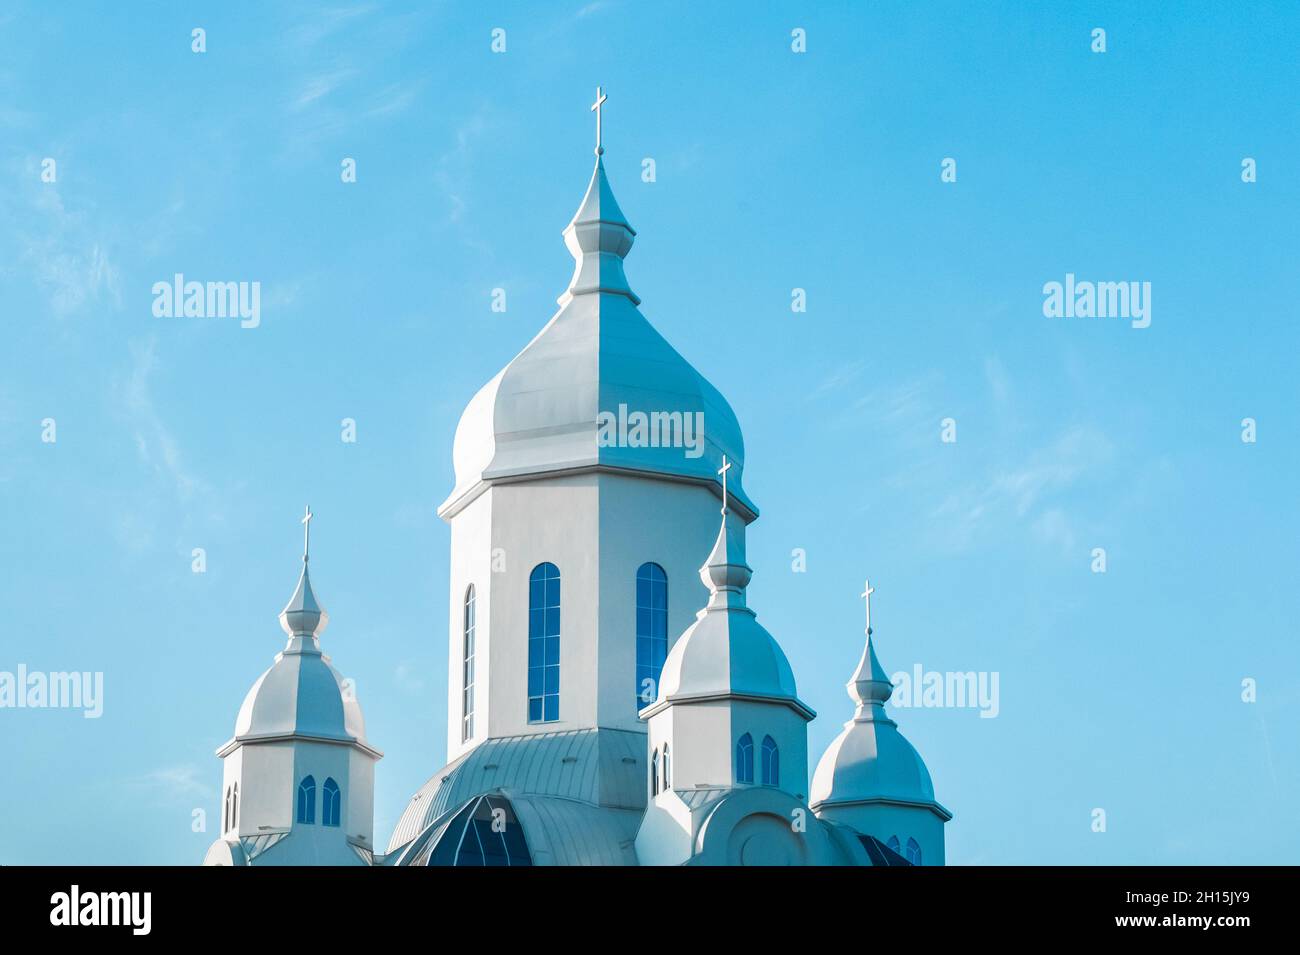 Modern church religious architecture Christian building against the blue sky. Stock Photo